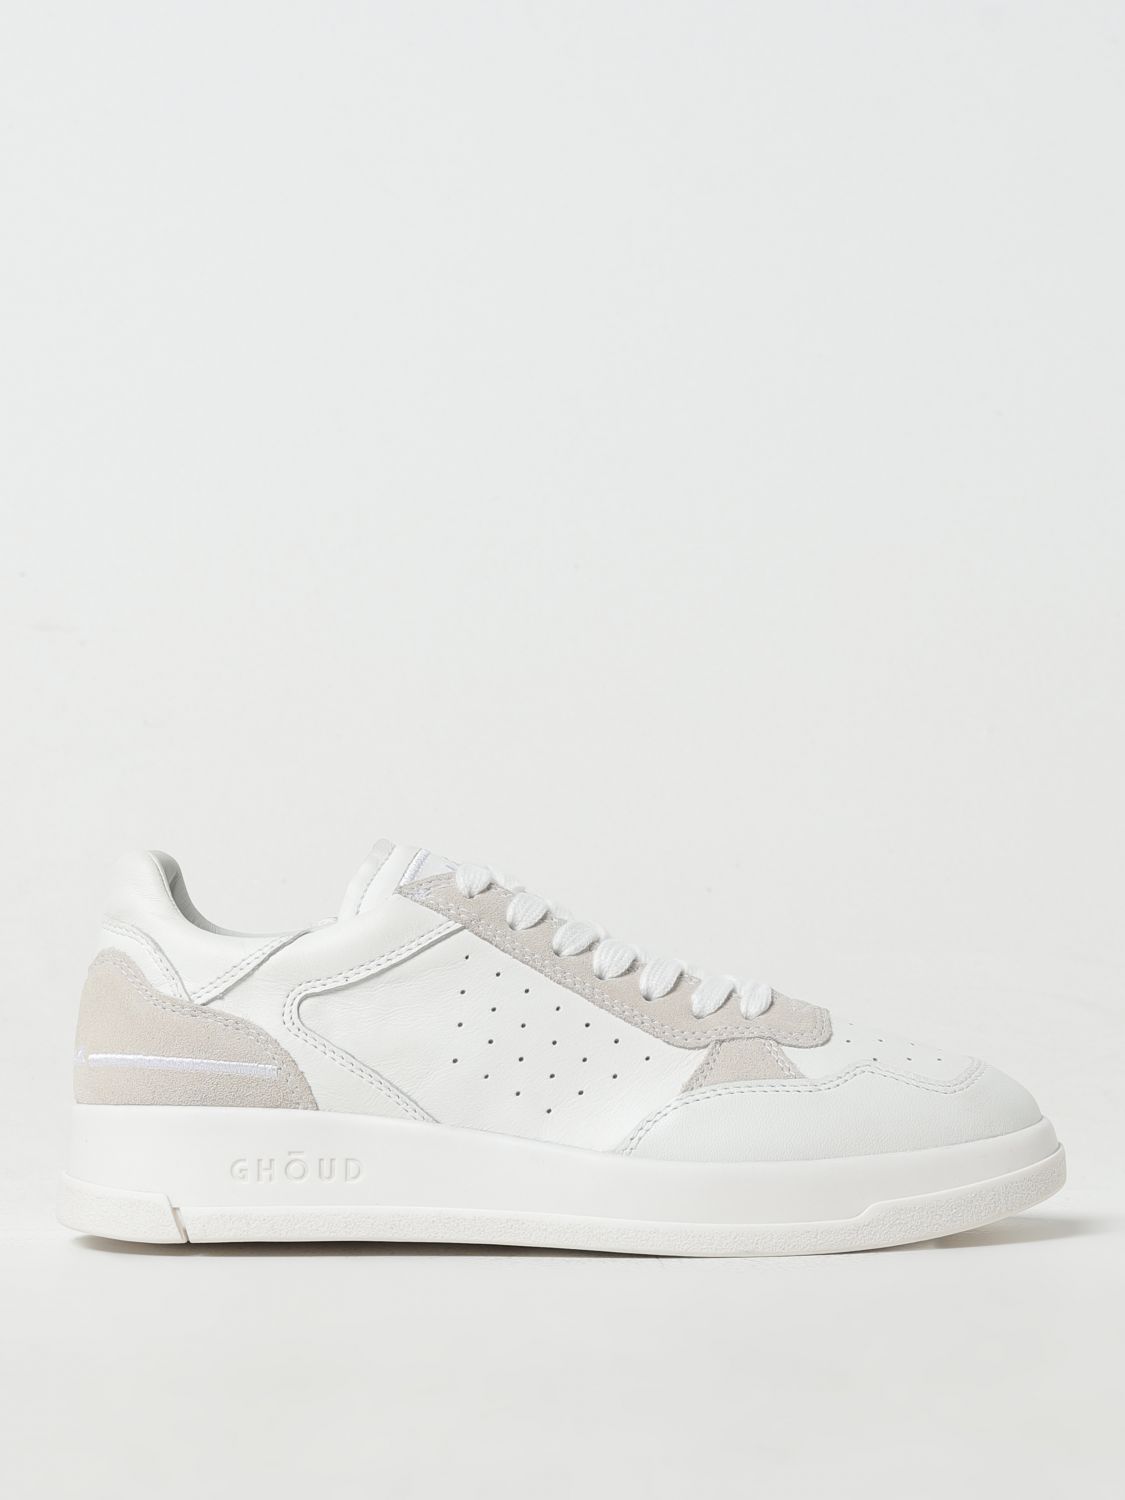 Ghoud Trainers GHOUD Men colour White